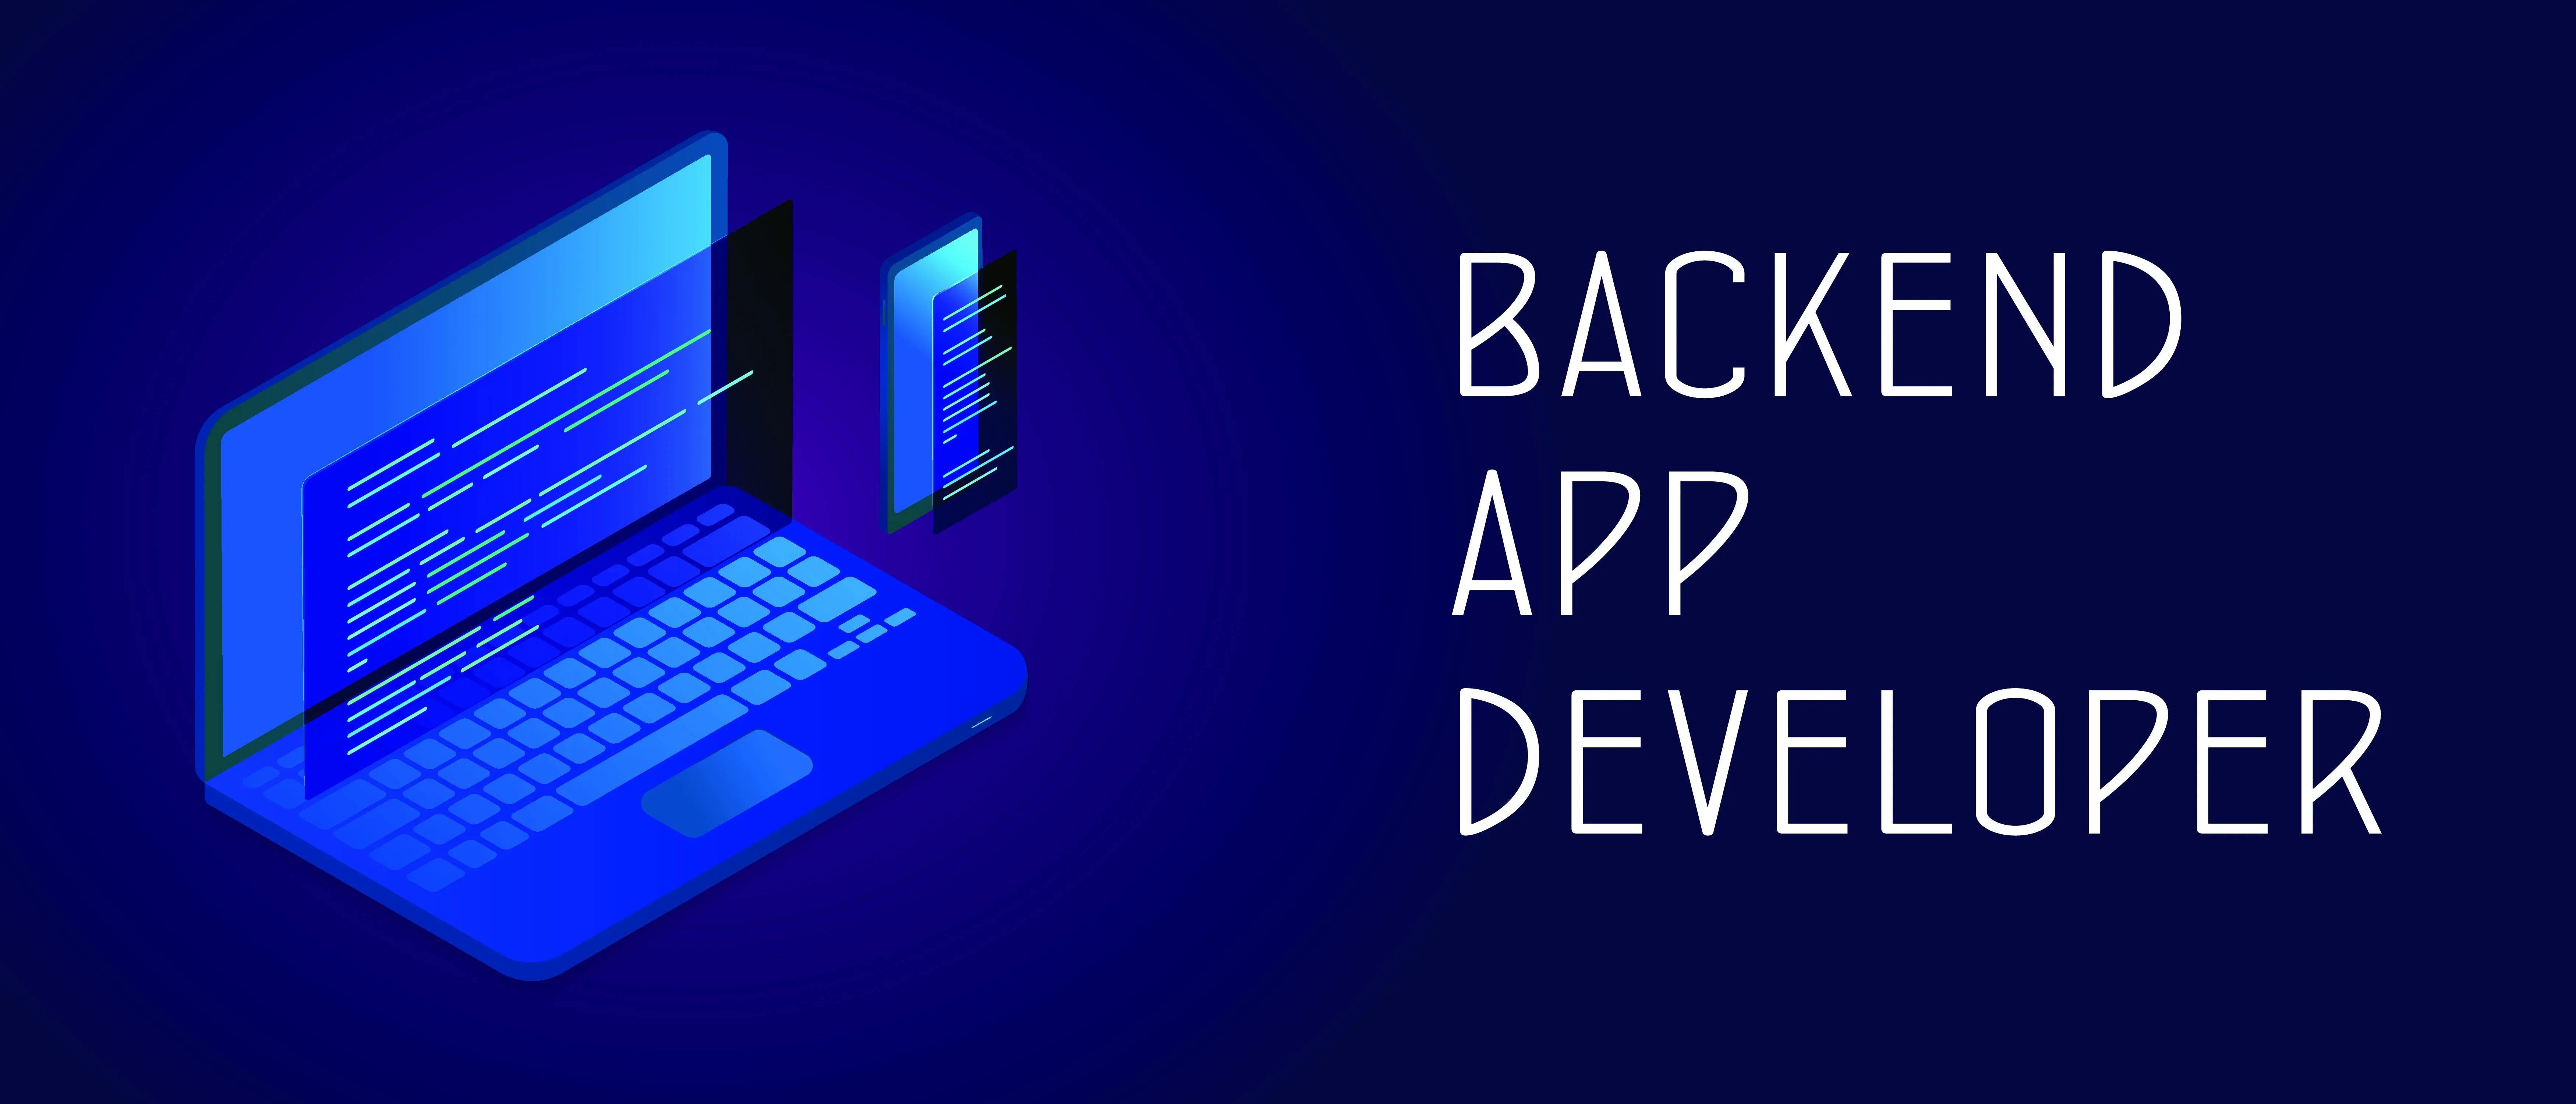 Backend Development Services & Solutions | Turing